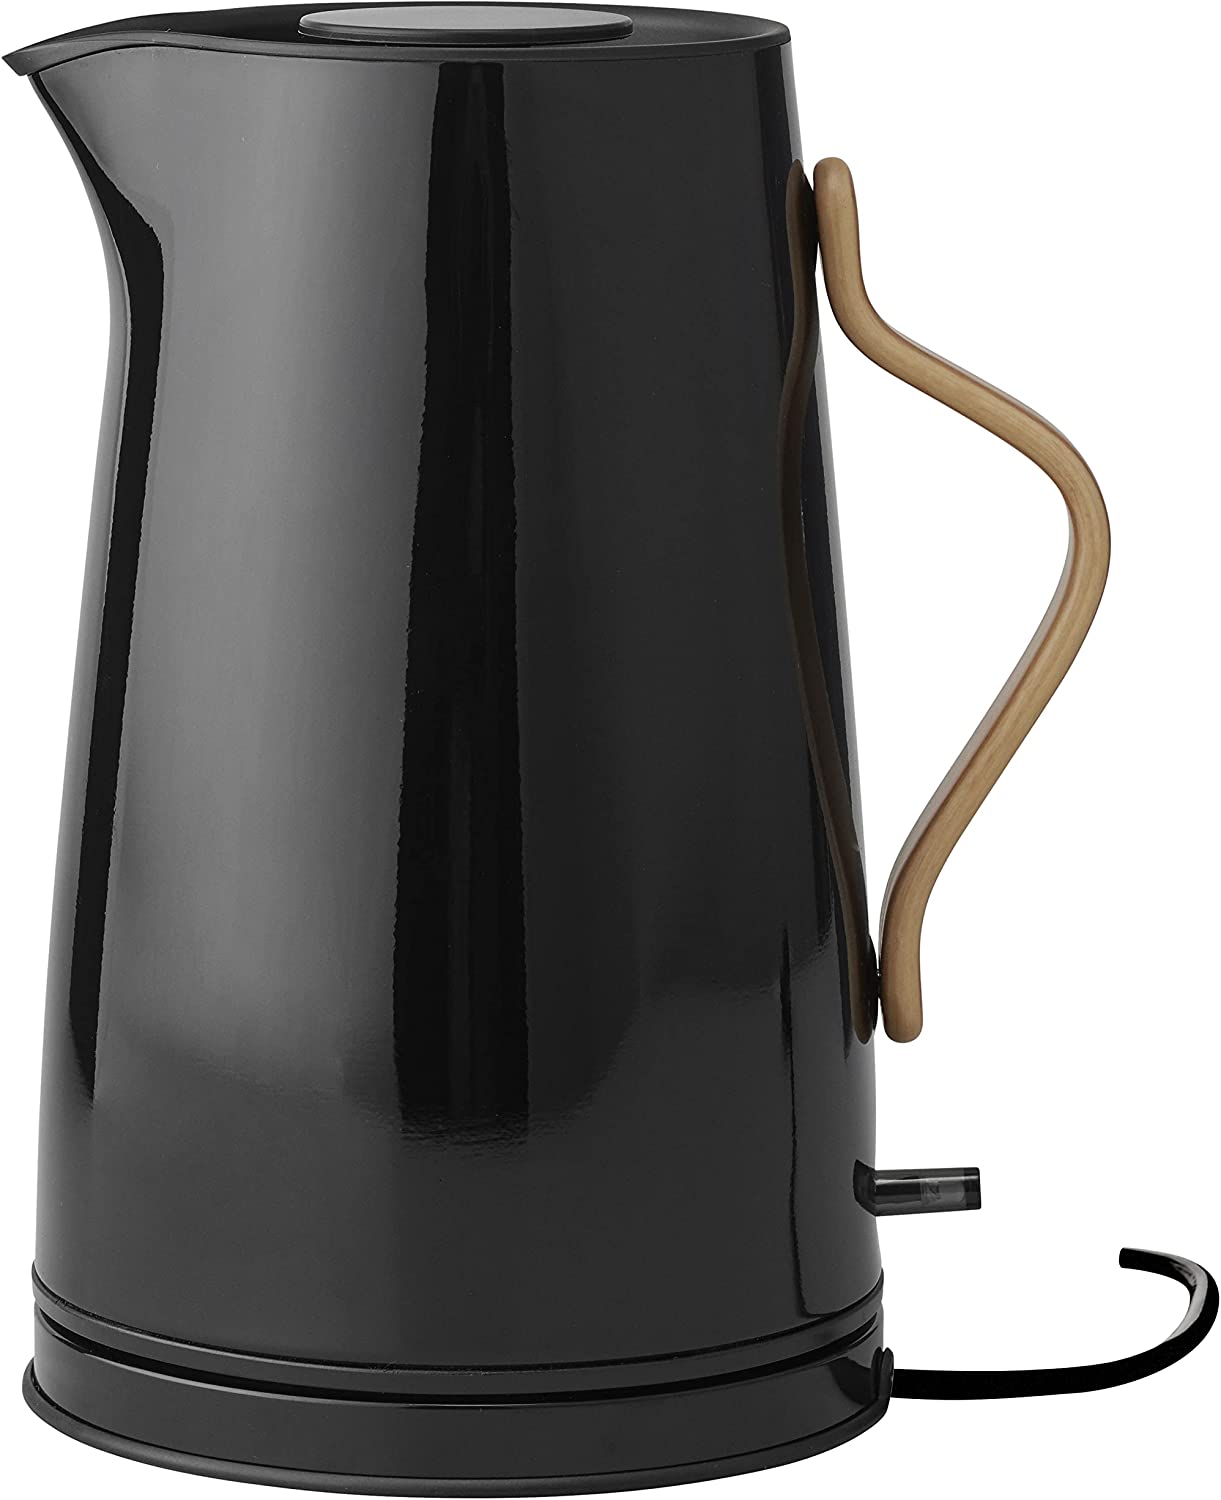 Stelton Emma Kettle - Electric Cooker, Kettle - Scandinavian Design - Filter, Dry Boil Safety Switch with Shut-Off, Beech Wood Handle - 1.2 Litres, Black